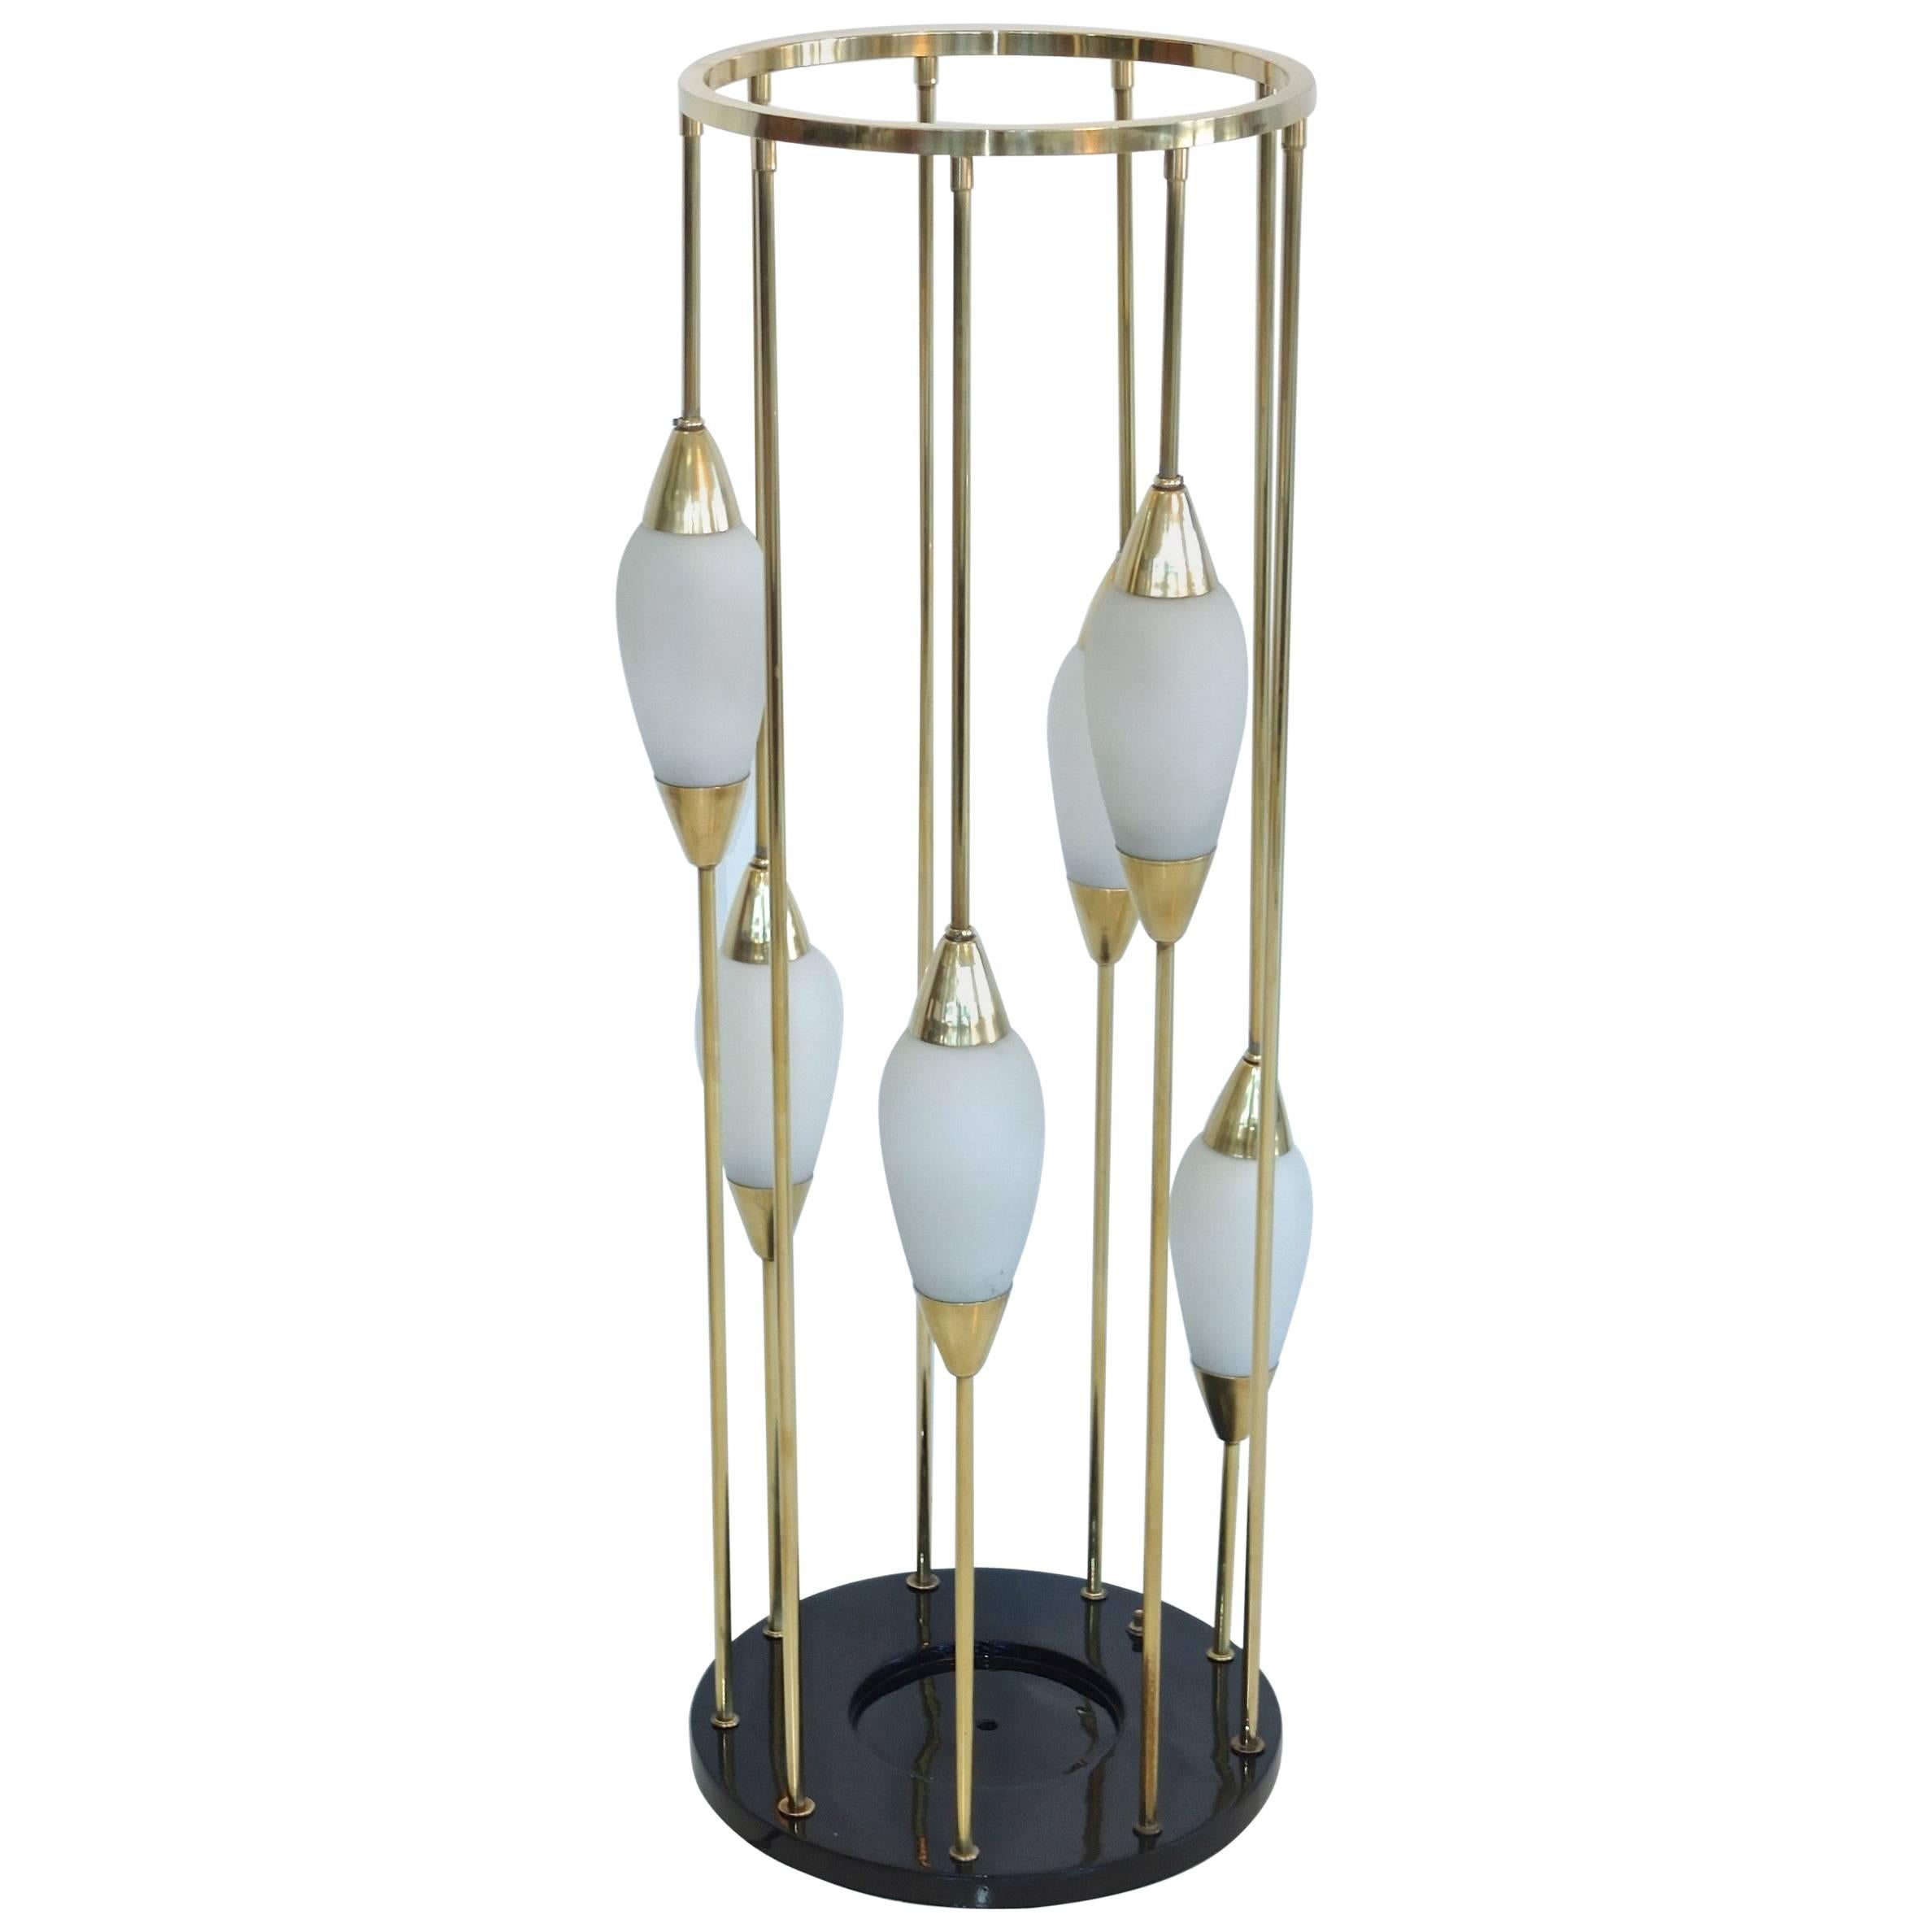 1950s Italian Brass Cage Lamp Pedestal Stand